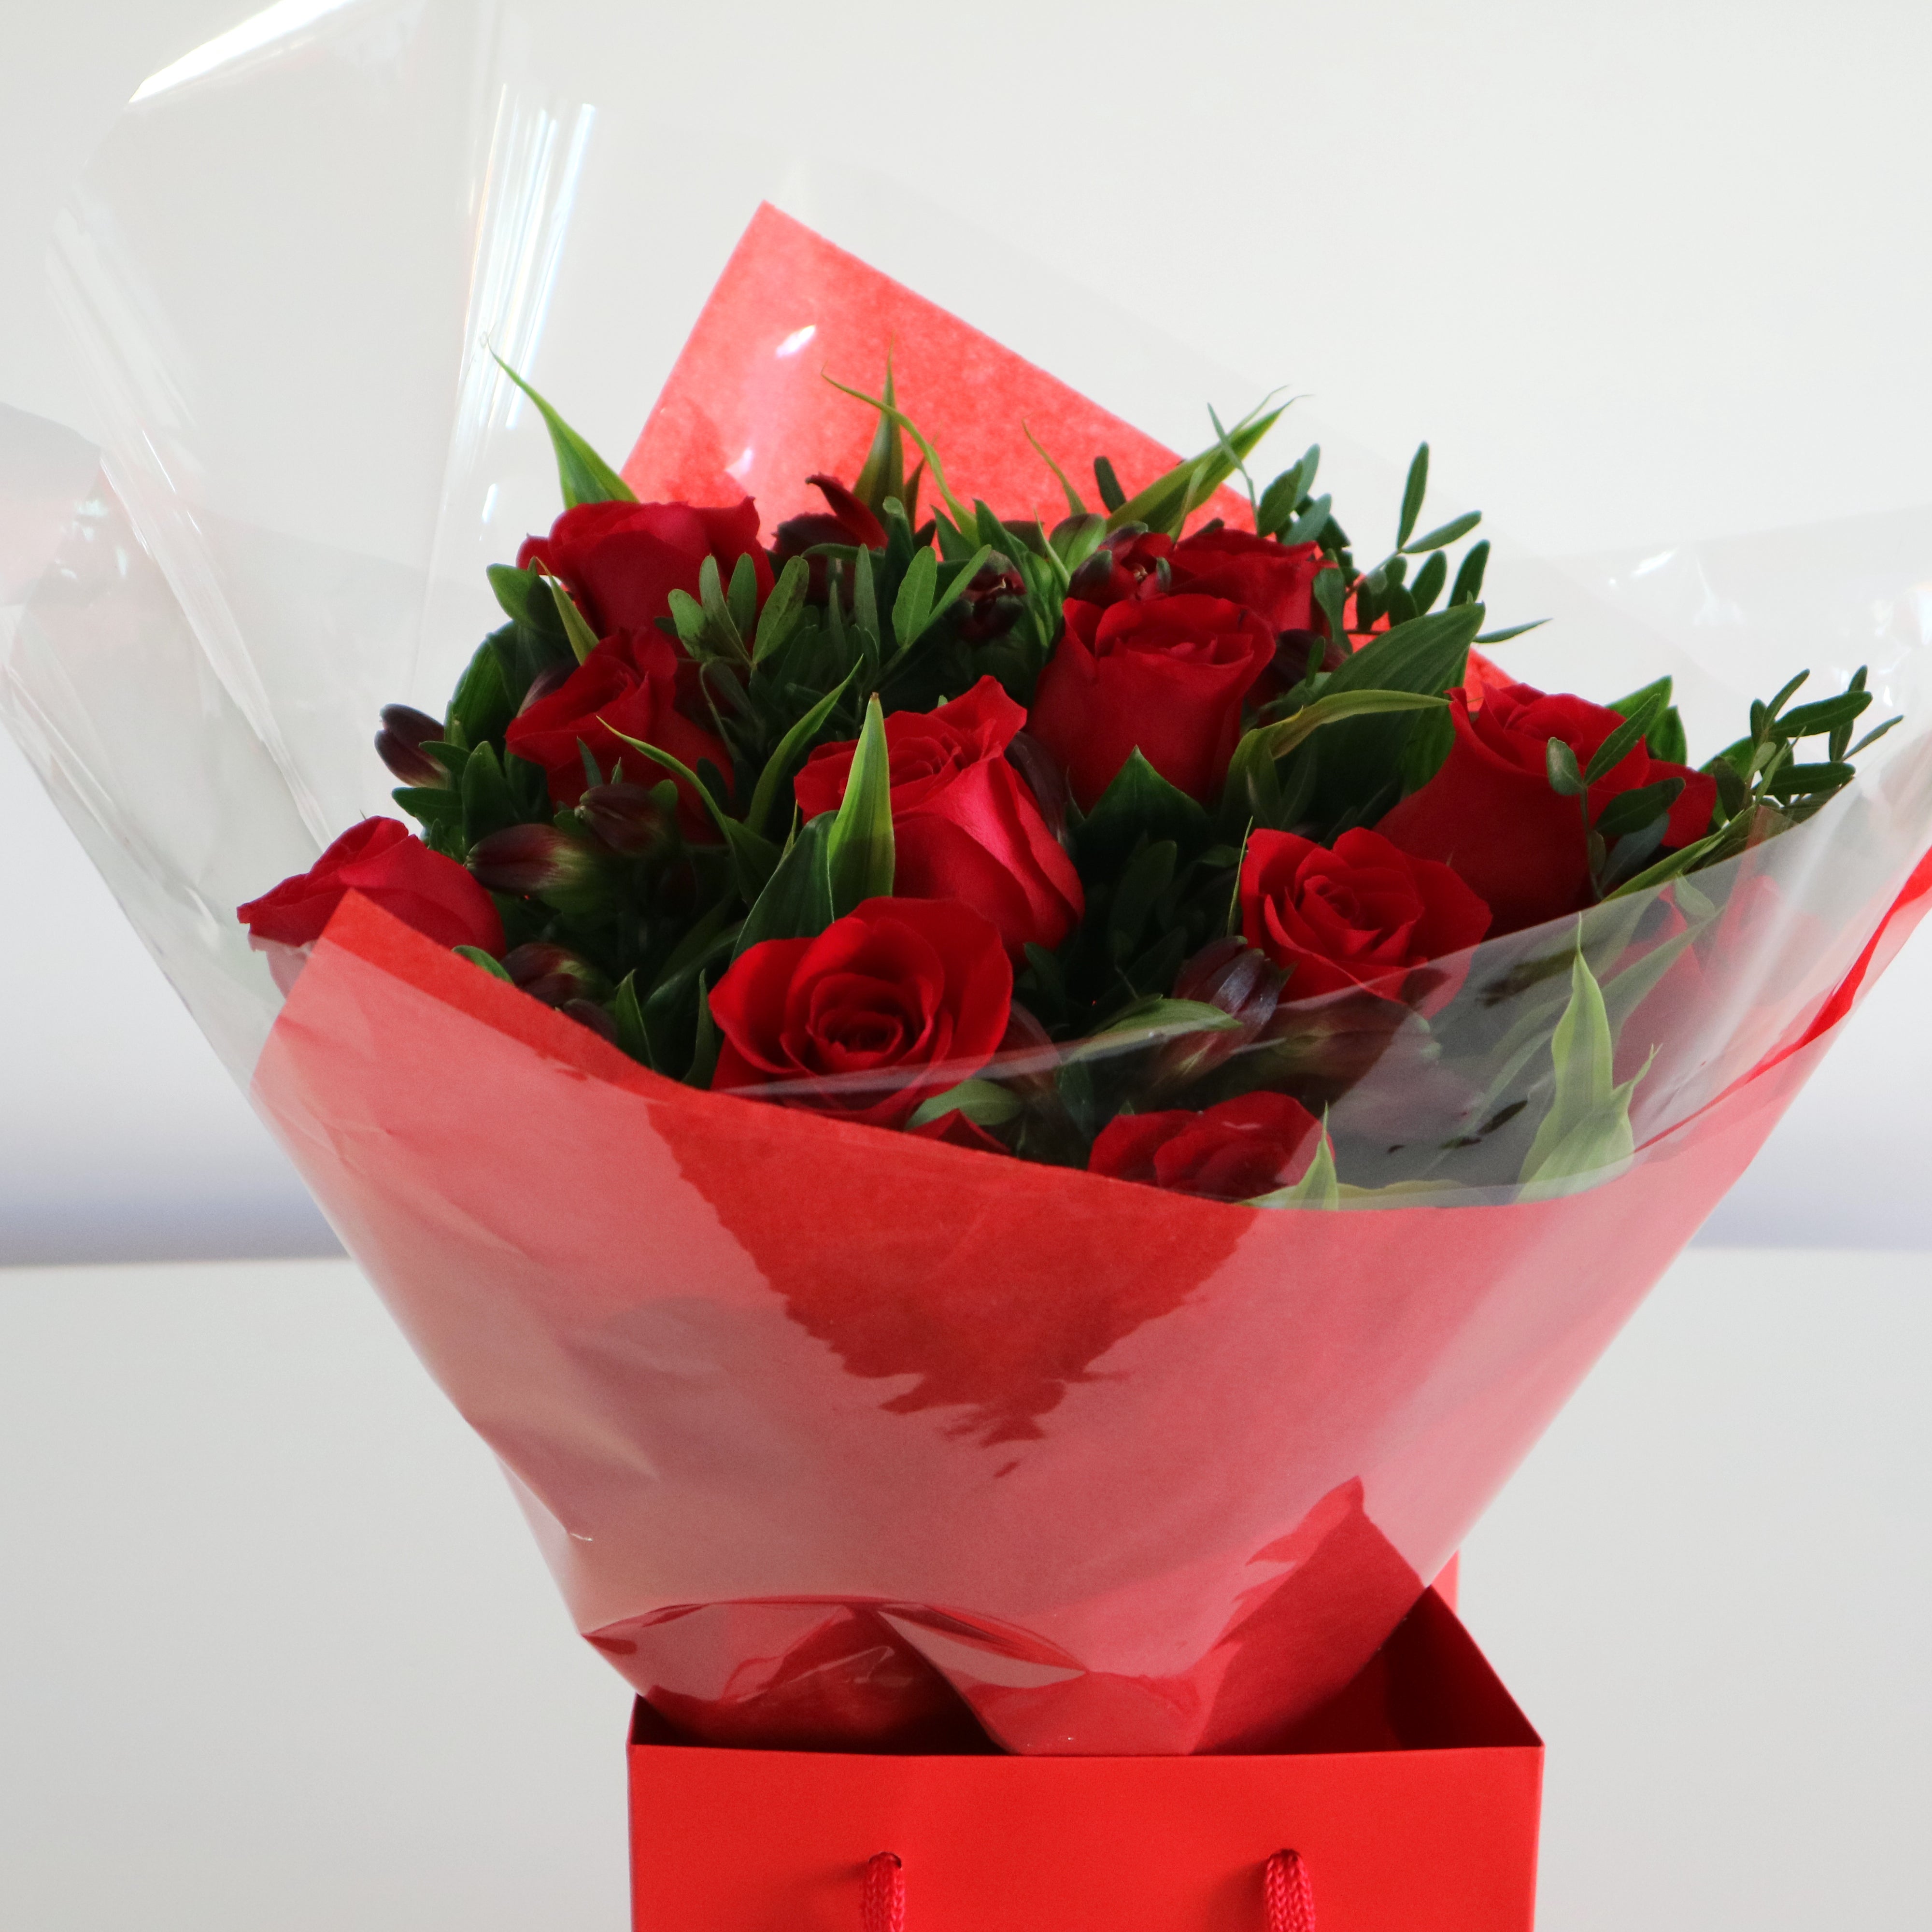 12 Red Rose Bouquet - J'Adore